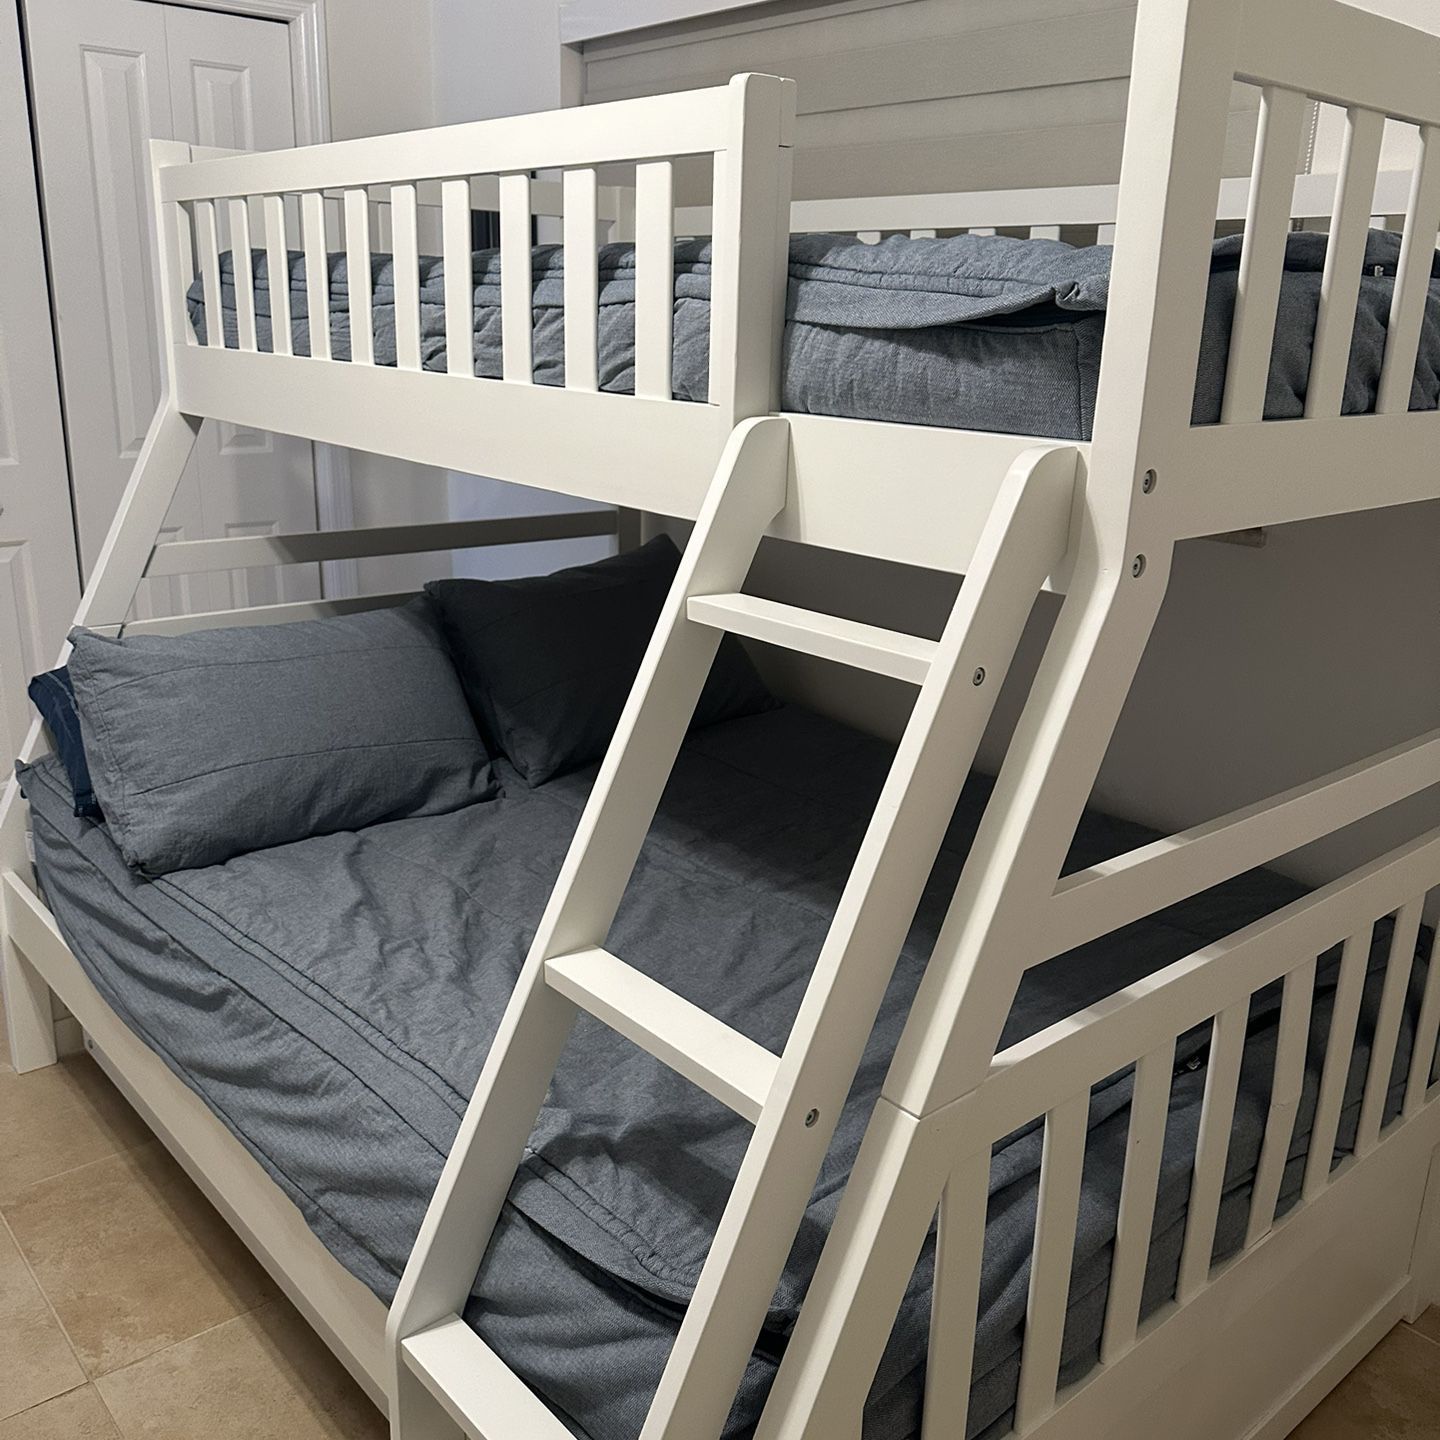 Two Bunk Beds, MUST SELL!